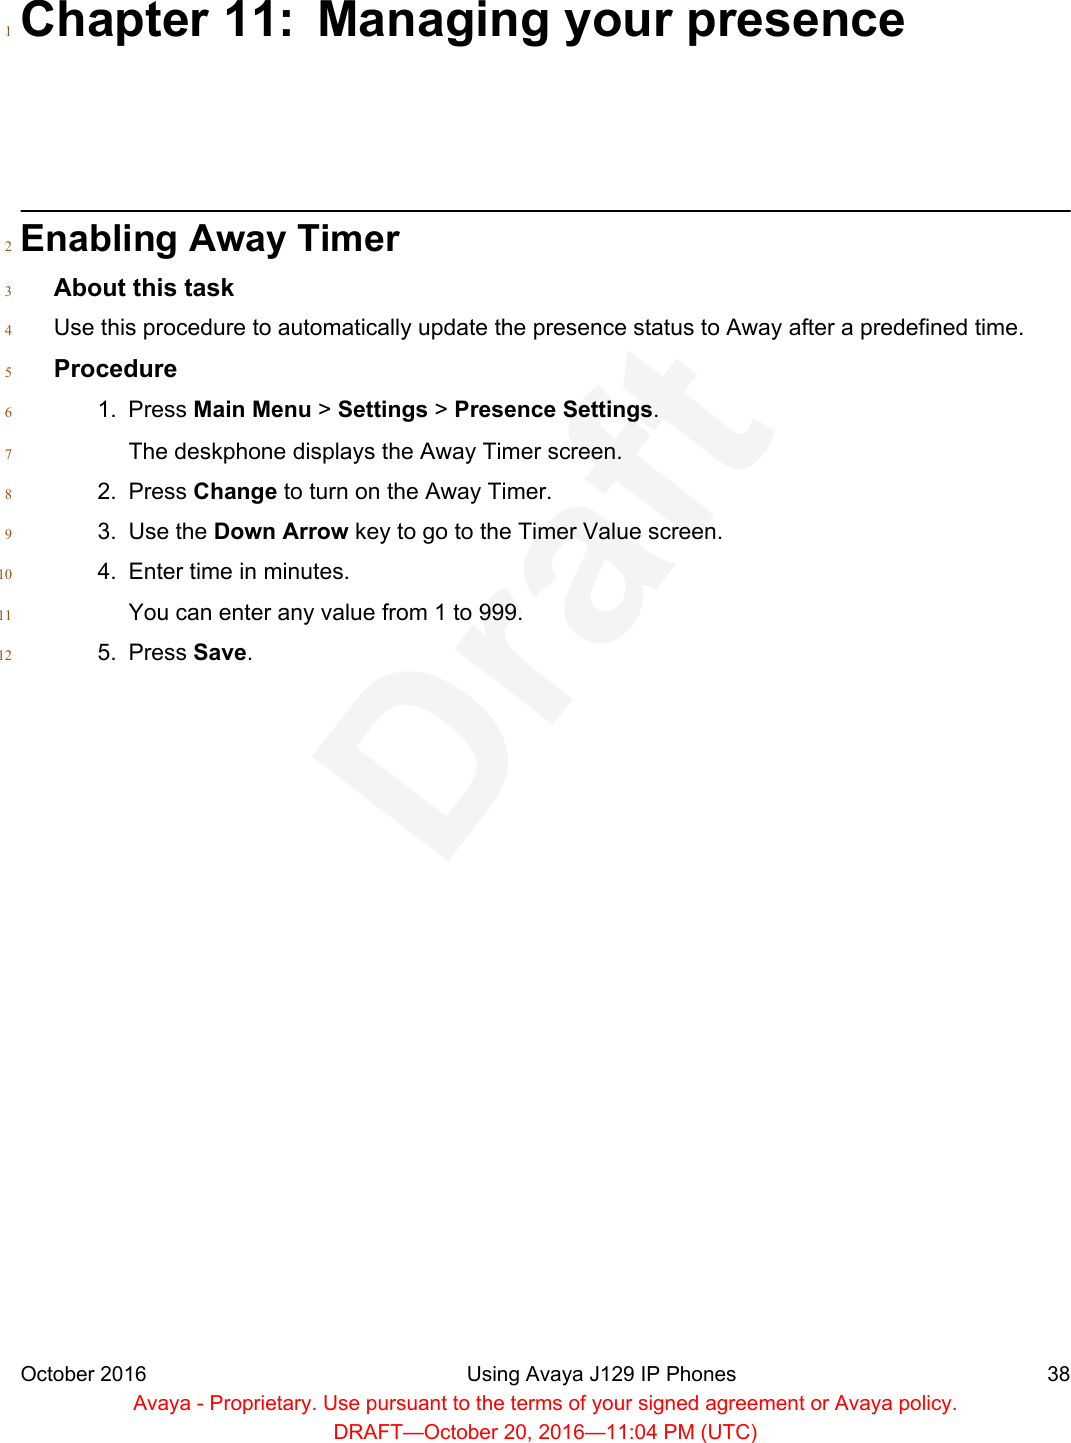 Chapter 11: Managing your presence1Enabling Away Timer2About this task3Use this procedure to automatically update the presence status to Away after a predefined time.4Procedure51. Press Main Menu &gt; Settings &gt; Presence Settings.6The deskphone displays the Away Timer screen.72. Press Change to turn on the Away Timer.83. Use the Down Arrow key to go to the Timer Value screen.94. Enter time in minutes.10You can enter any value from 1 to 999.115. Press Save.12October 2016 Using Avaya J129 IP Phones 38Avaya - Proprietary. Use pursuant to the terms of your signed agreement or Avaya policy.DRAFT—October 20, 2016—11:04 PM (UTC)